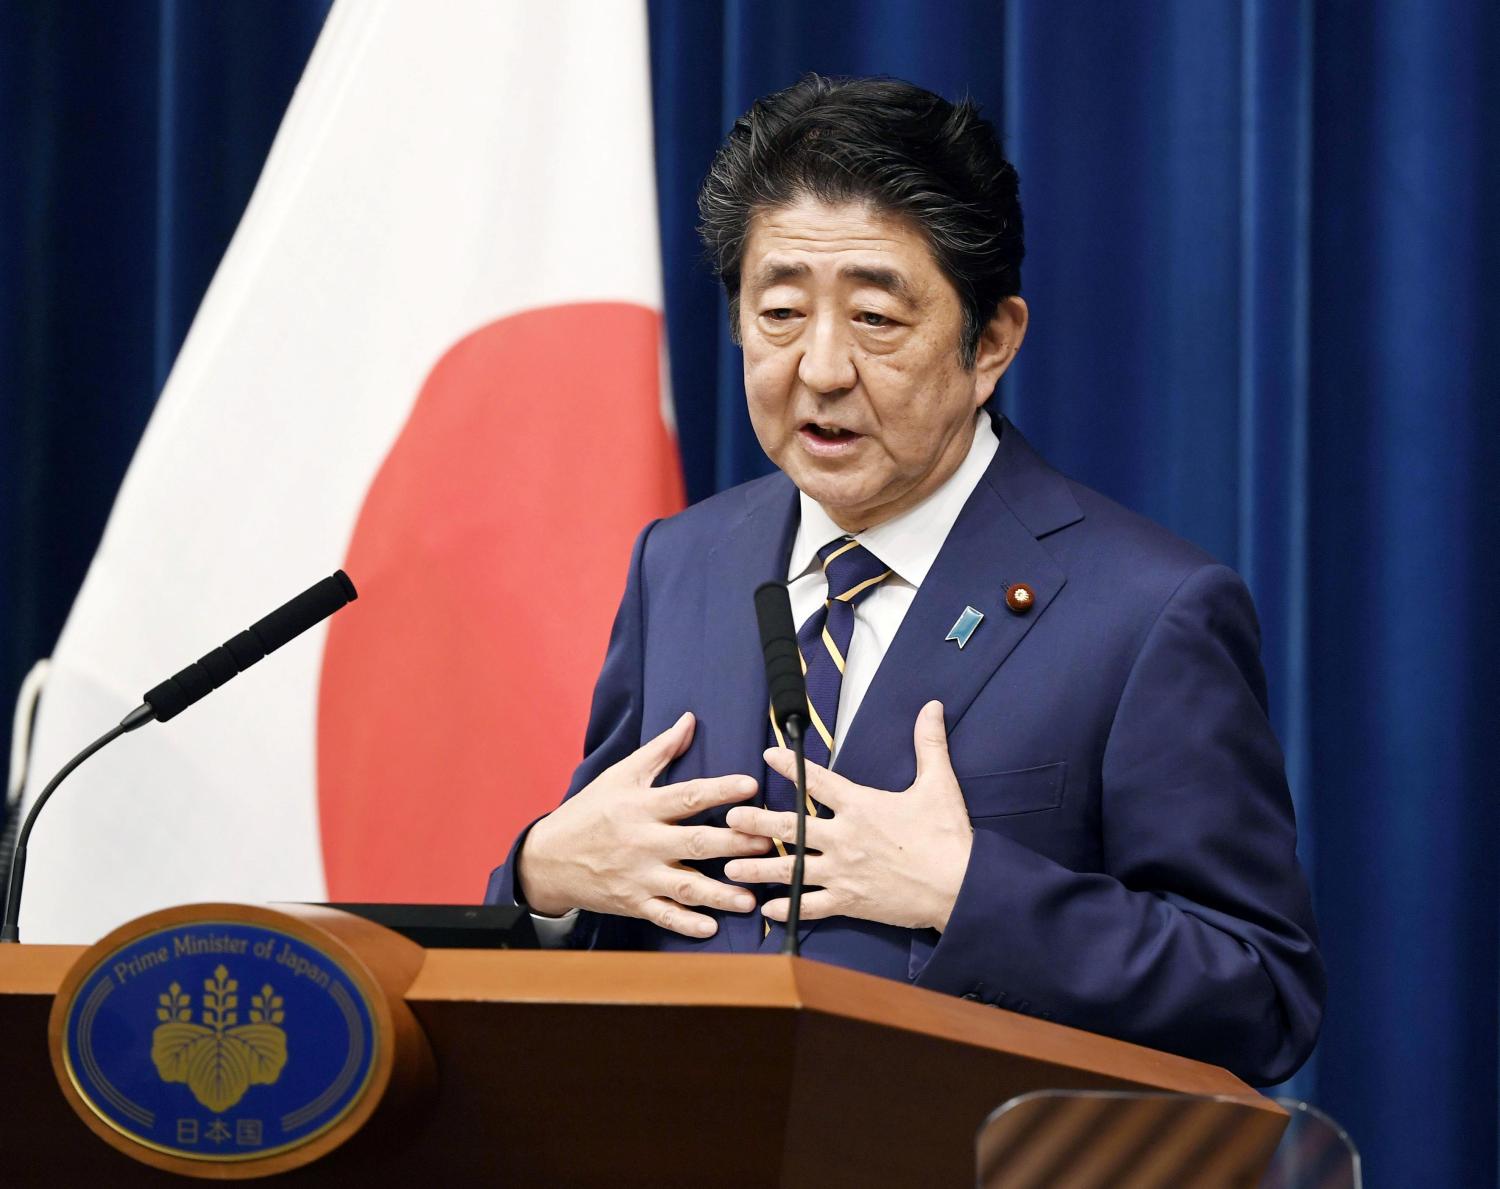 Japan's Prime Minister Shinzo Abe speaks during a news conference at Abe's official residence in Tokyo, Japan December 10, 2018.  Mandatory credit Kyodo/via REUTERS ATTENTION EDITORS - THIS IMAGE WAS PROVIDED BY A THIRD PARTY. MANDATORY CREDIT. JAPAN OUT. NO COMMERCIAL OR EDITORIAL SALES IN JAPAN. - RC1281930780